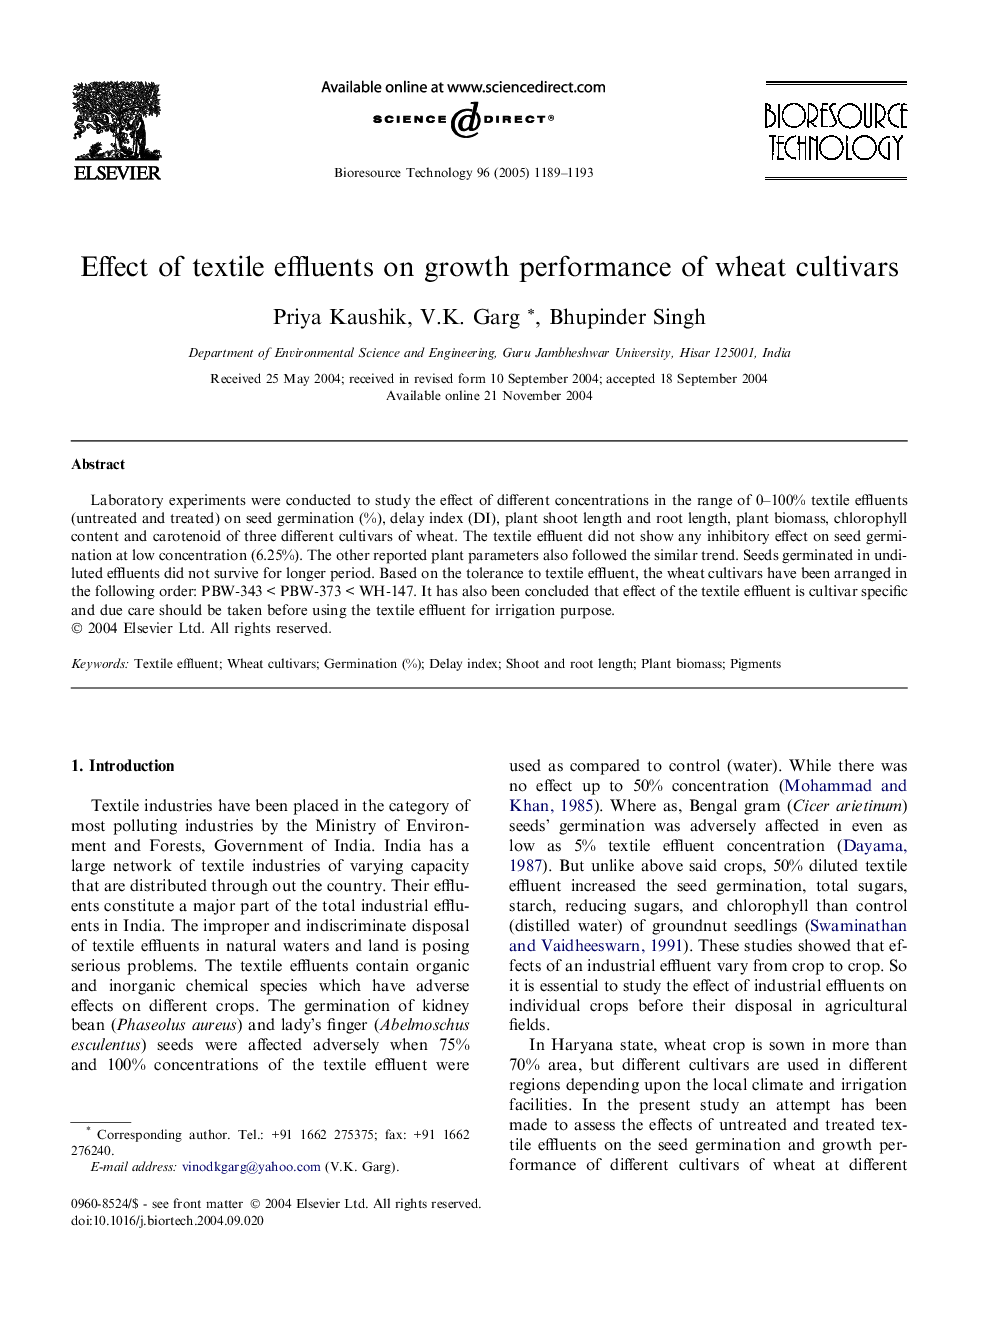 Effect of textile effluents on growth performance of wheat cultivars